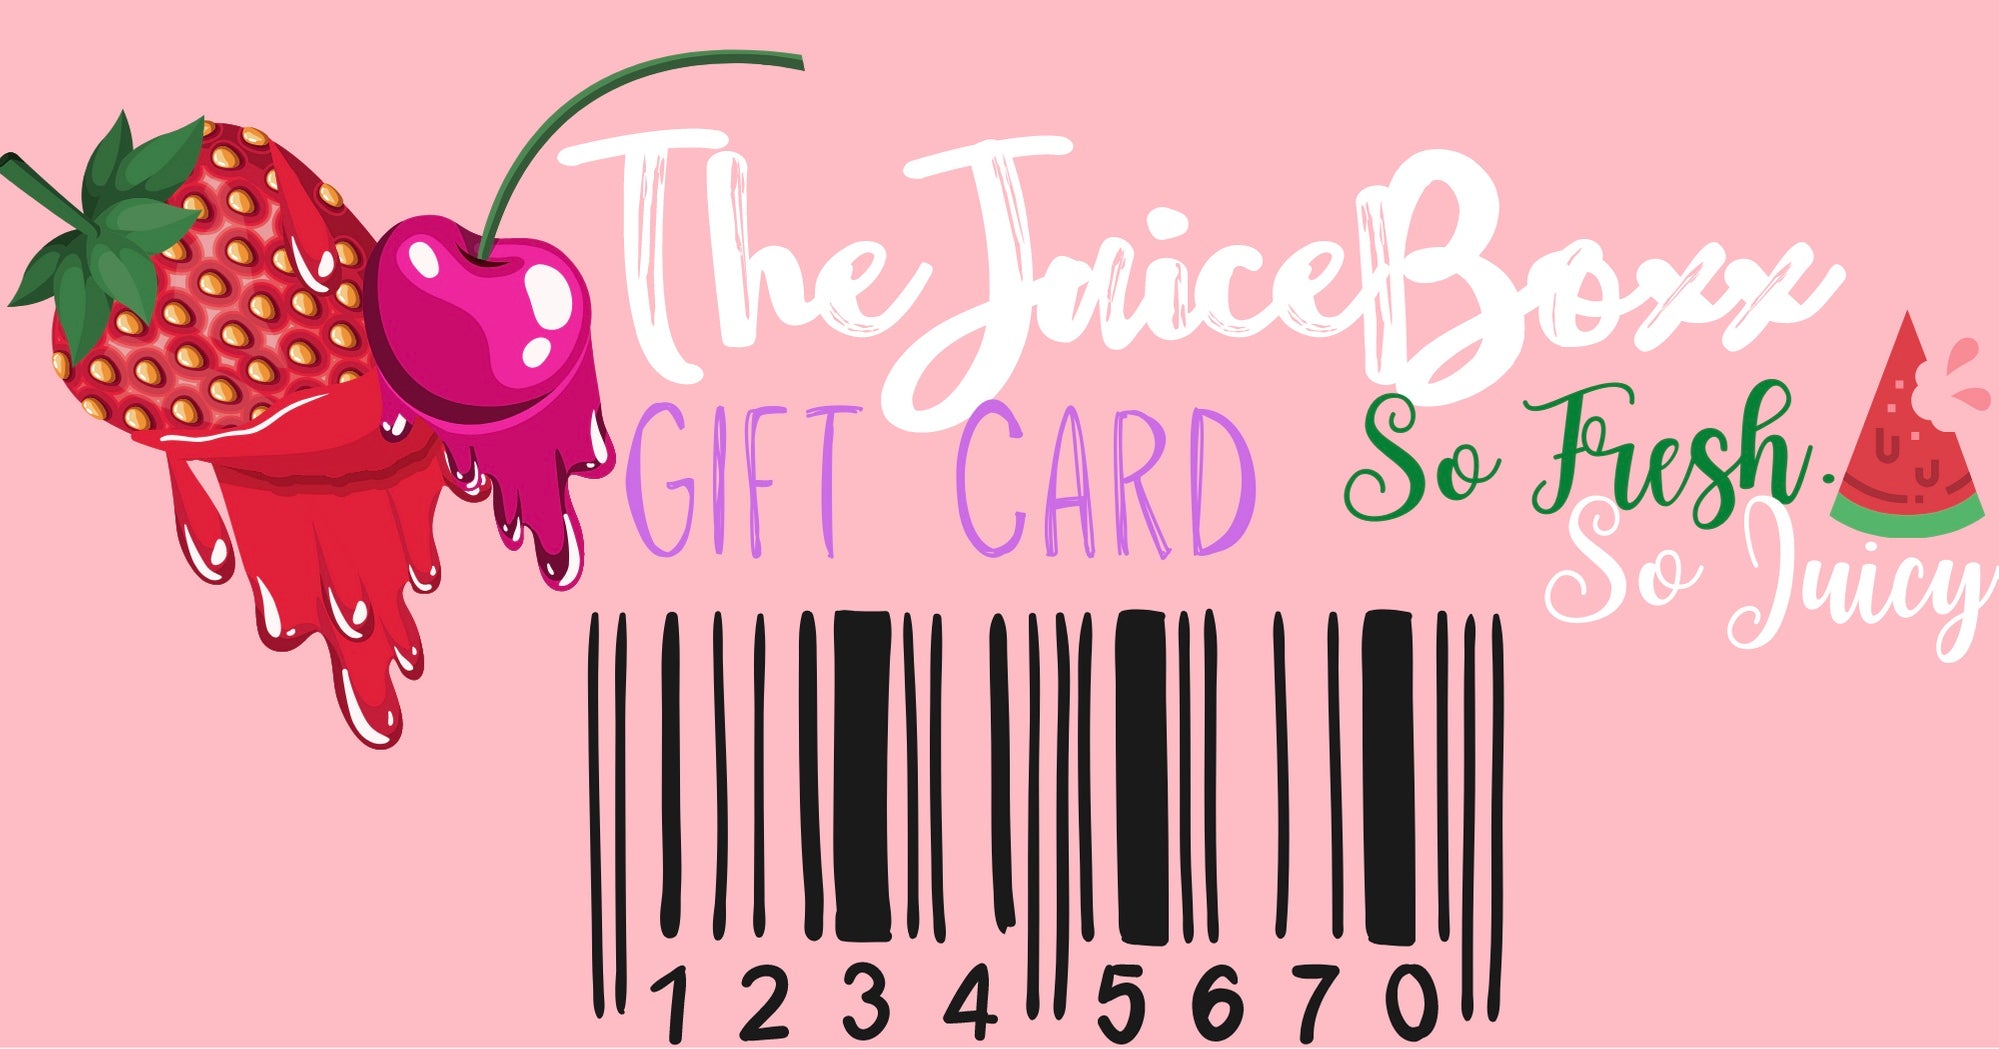 The Juice Boxx Gift Cards